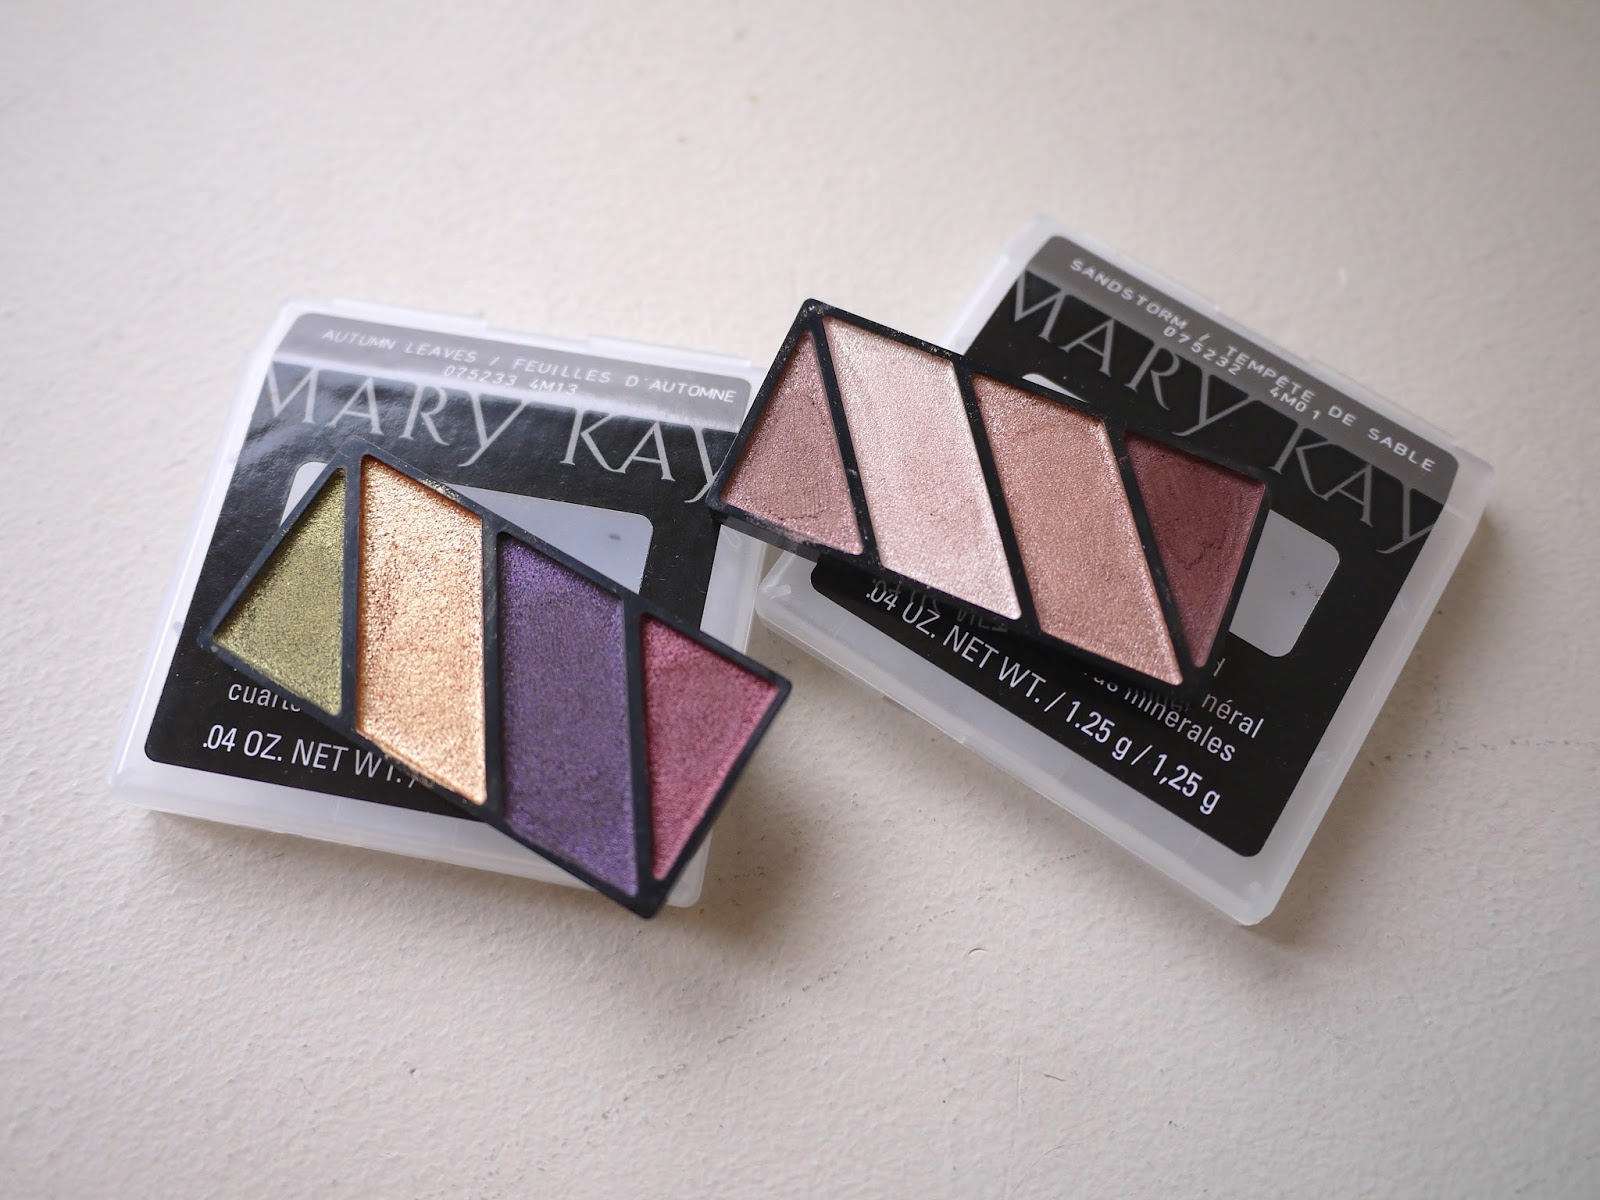 Mary Kay Autumn Leaves and Sandstorm Quad Review swatches